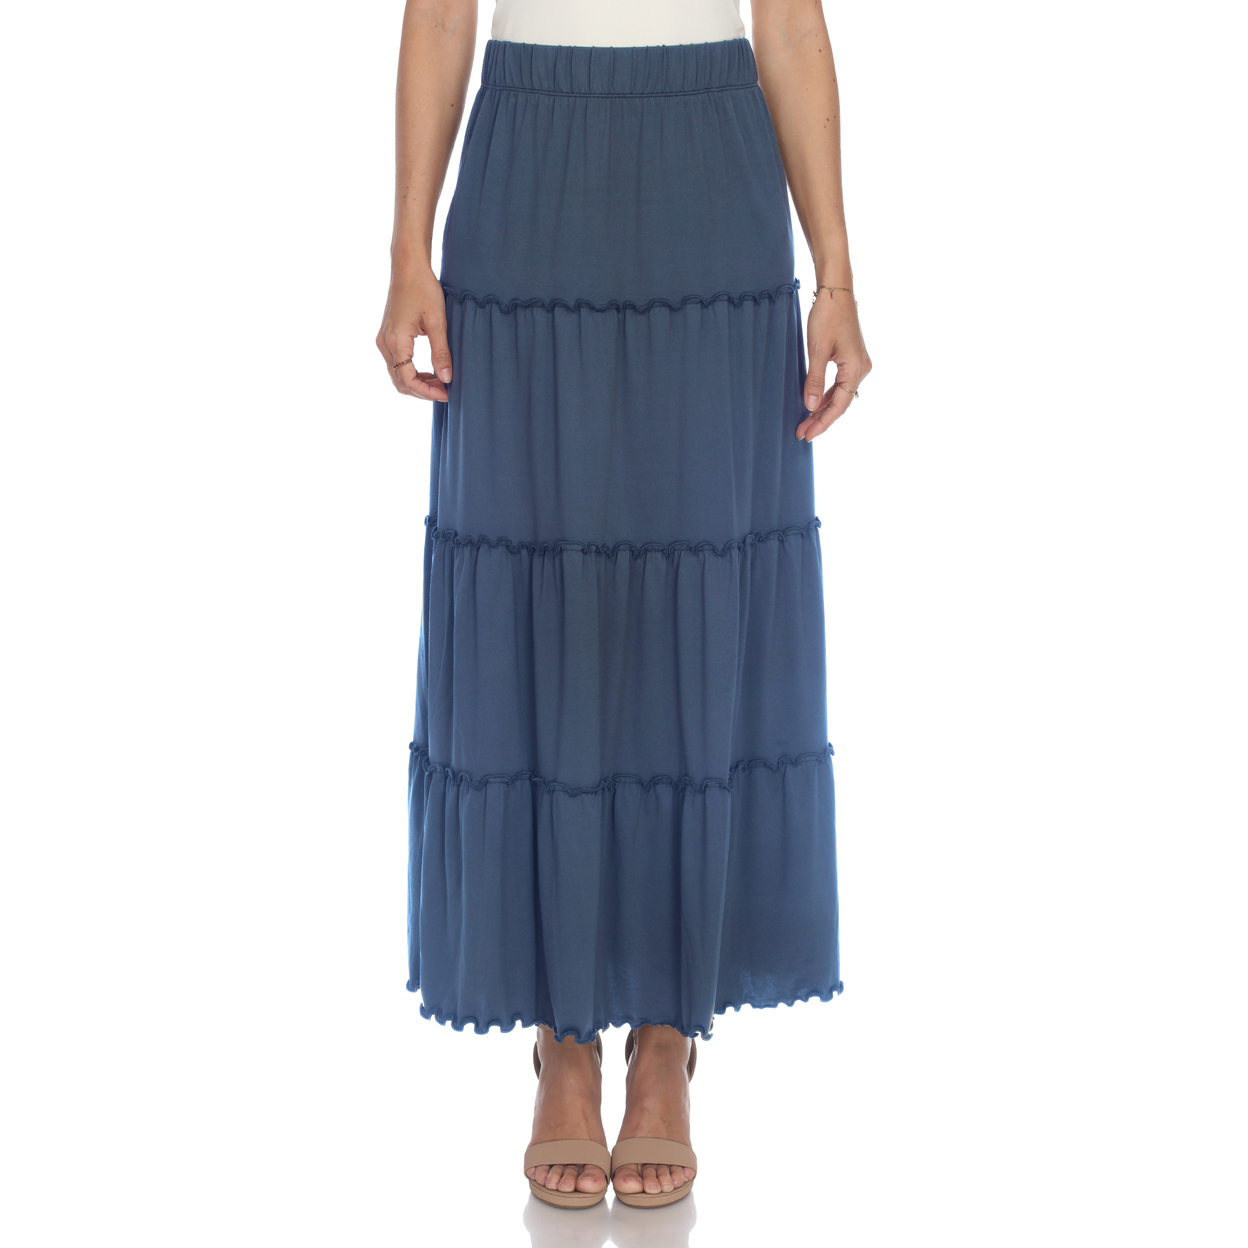 White Mark Women's Tiered Maxi Skirt With Pockets - Denim Blue, X-large